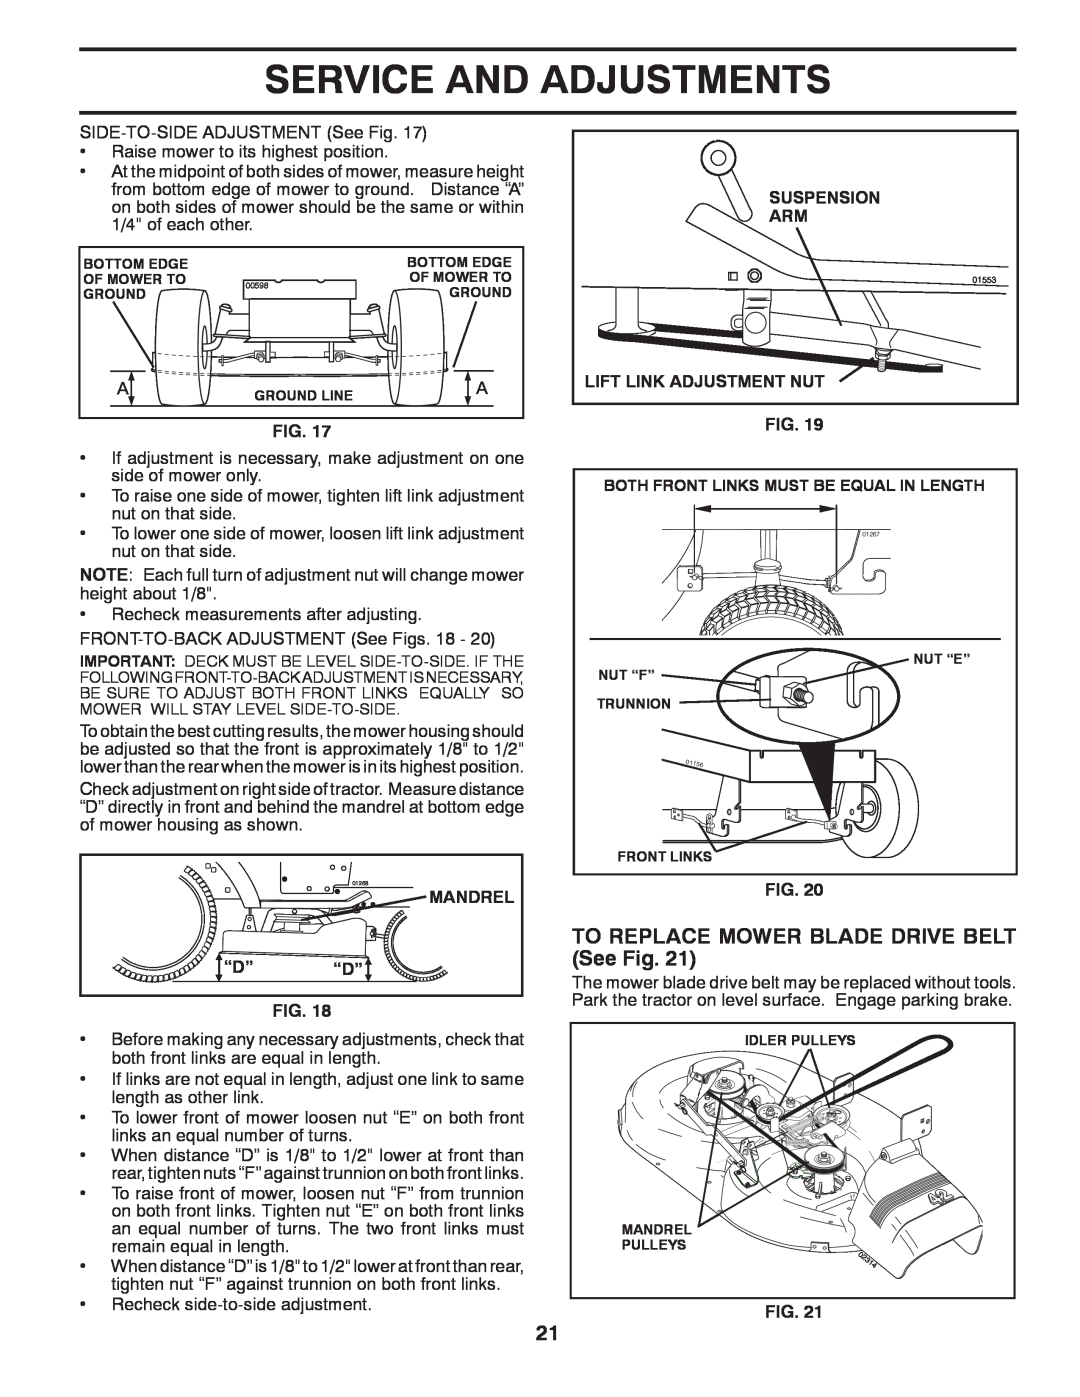 Poulan 532 40 36-87 manual TO REPLACE MOWER BLADE DRIVE BELT See Fig, Service And Adjustments, Mandrel “D” “D”, Suspension 